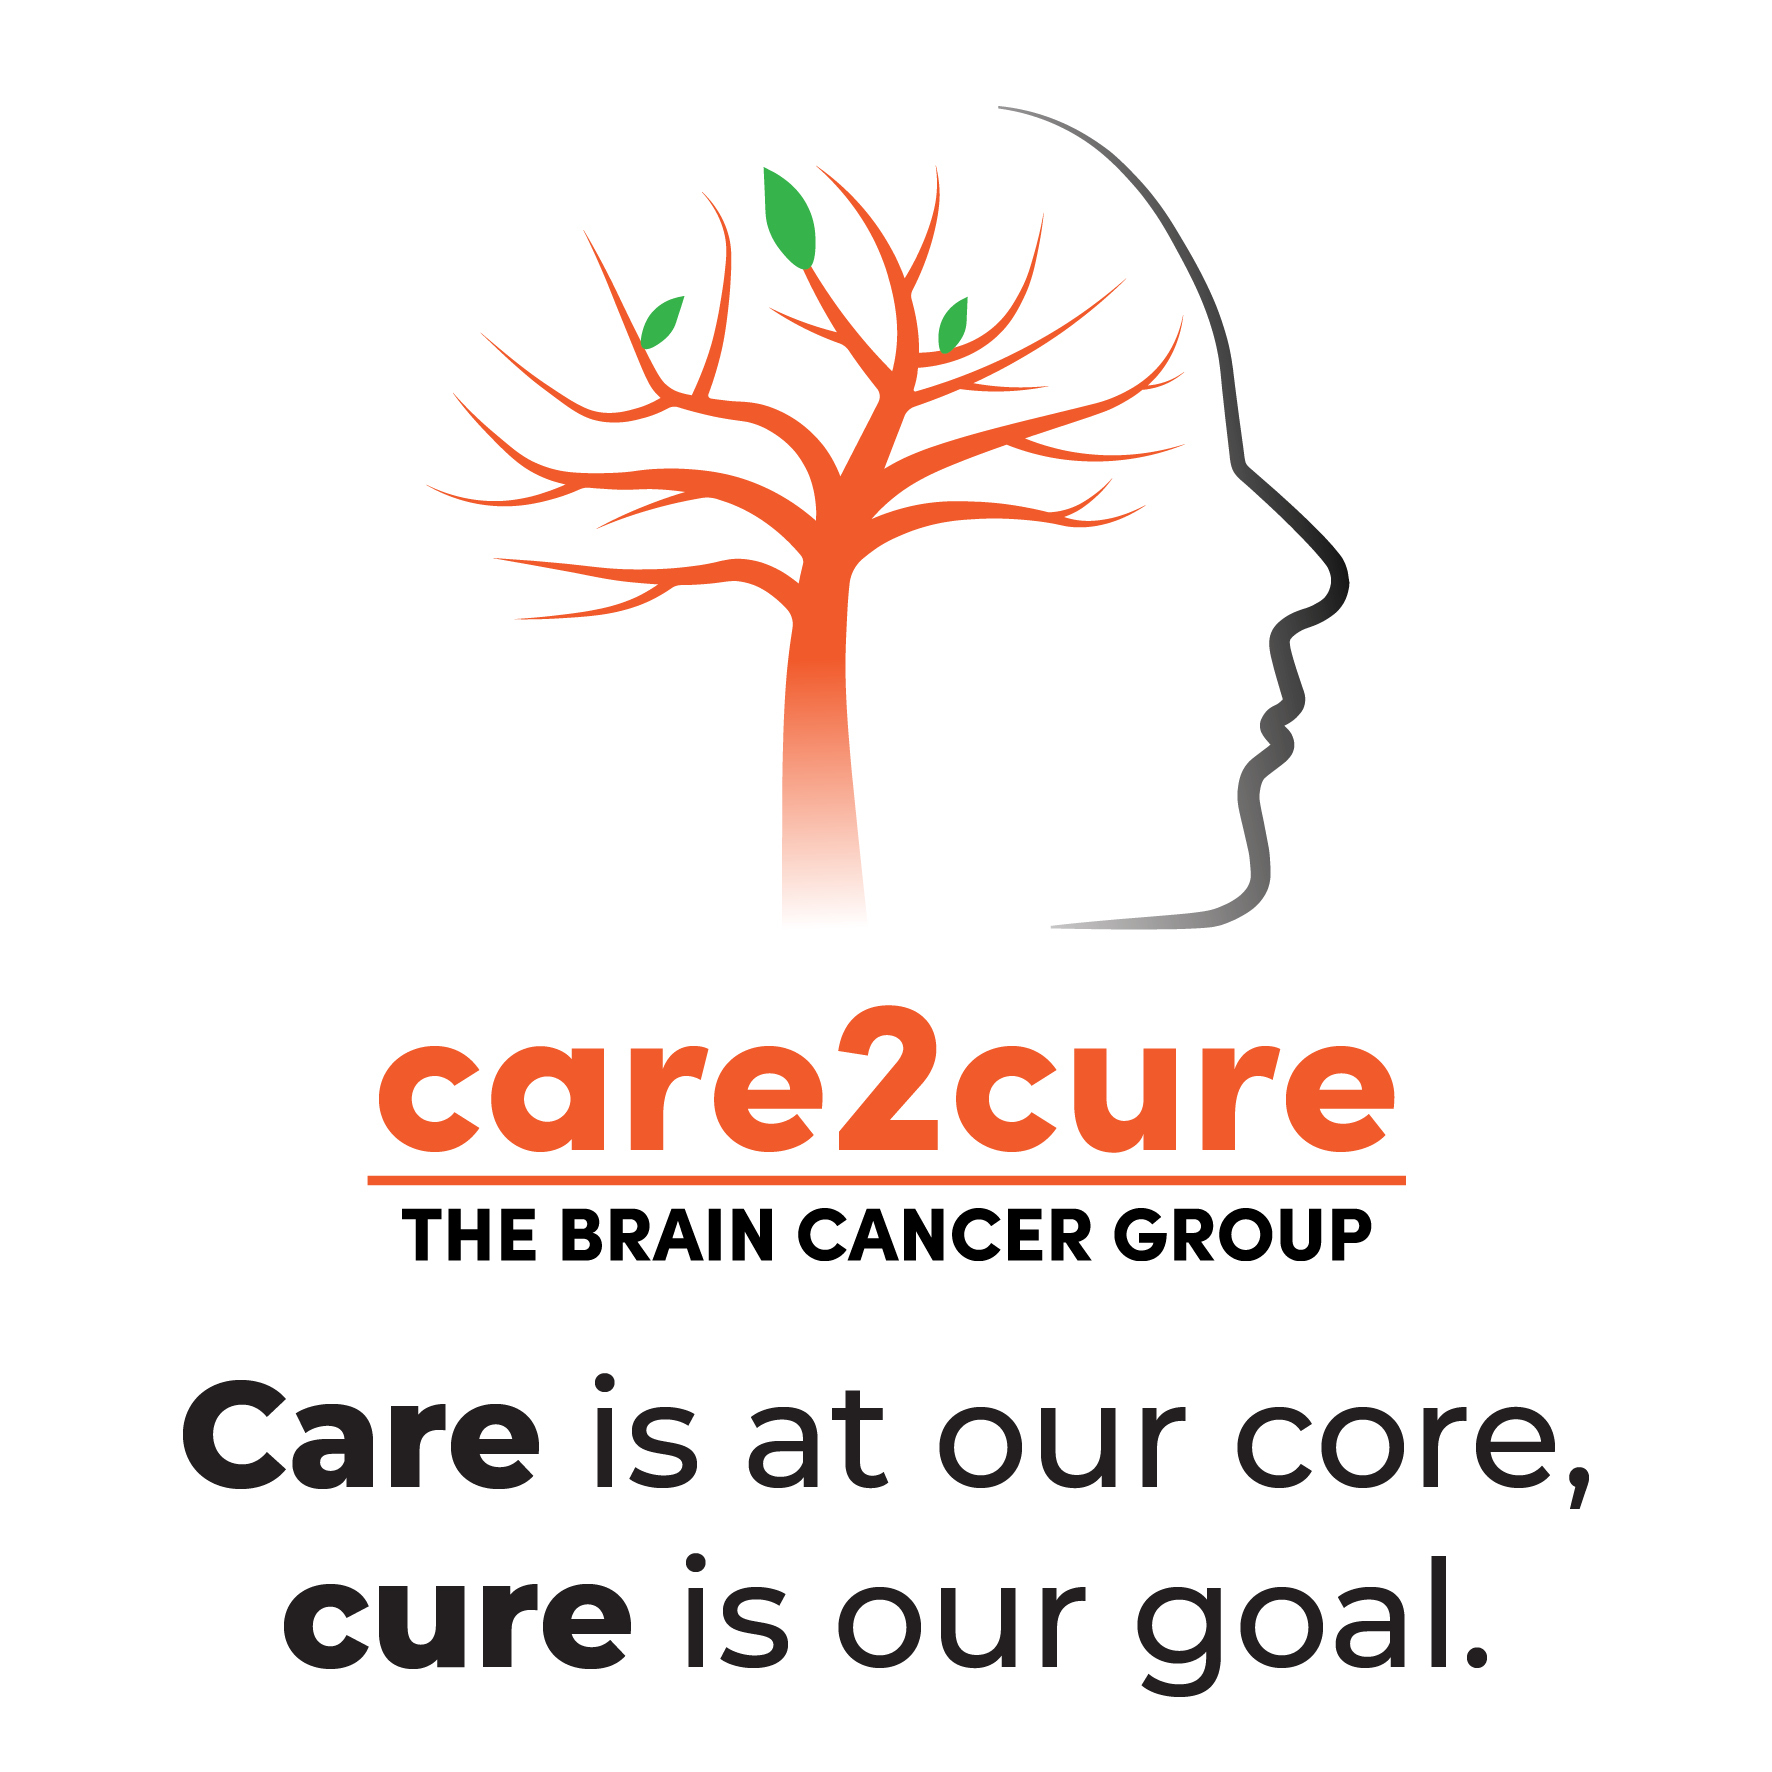 The Brain Cancer Group, Care2Cure